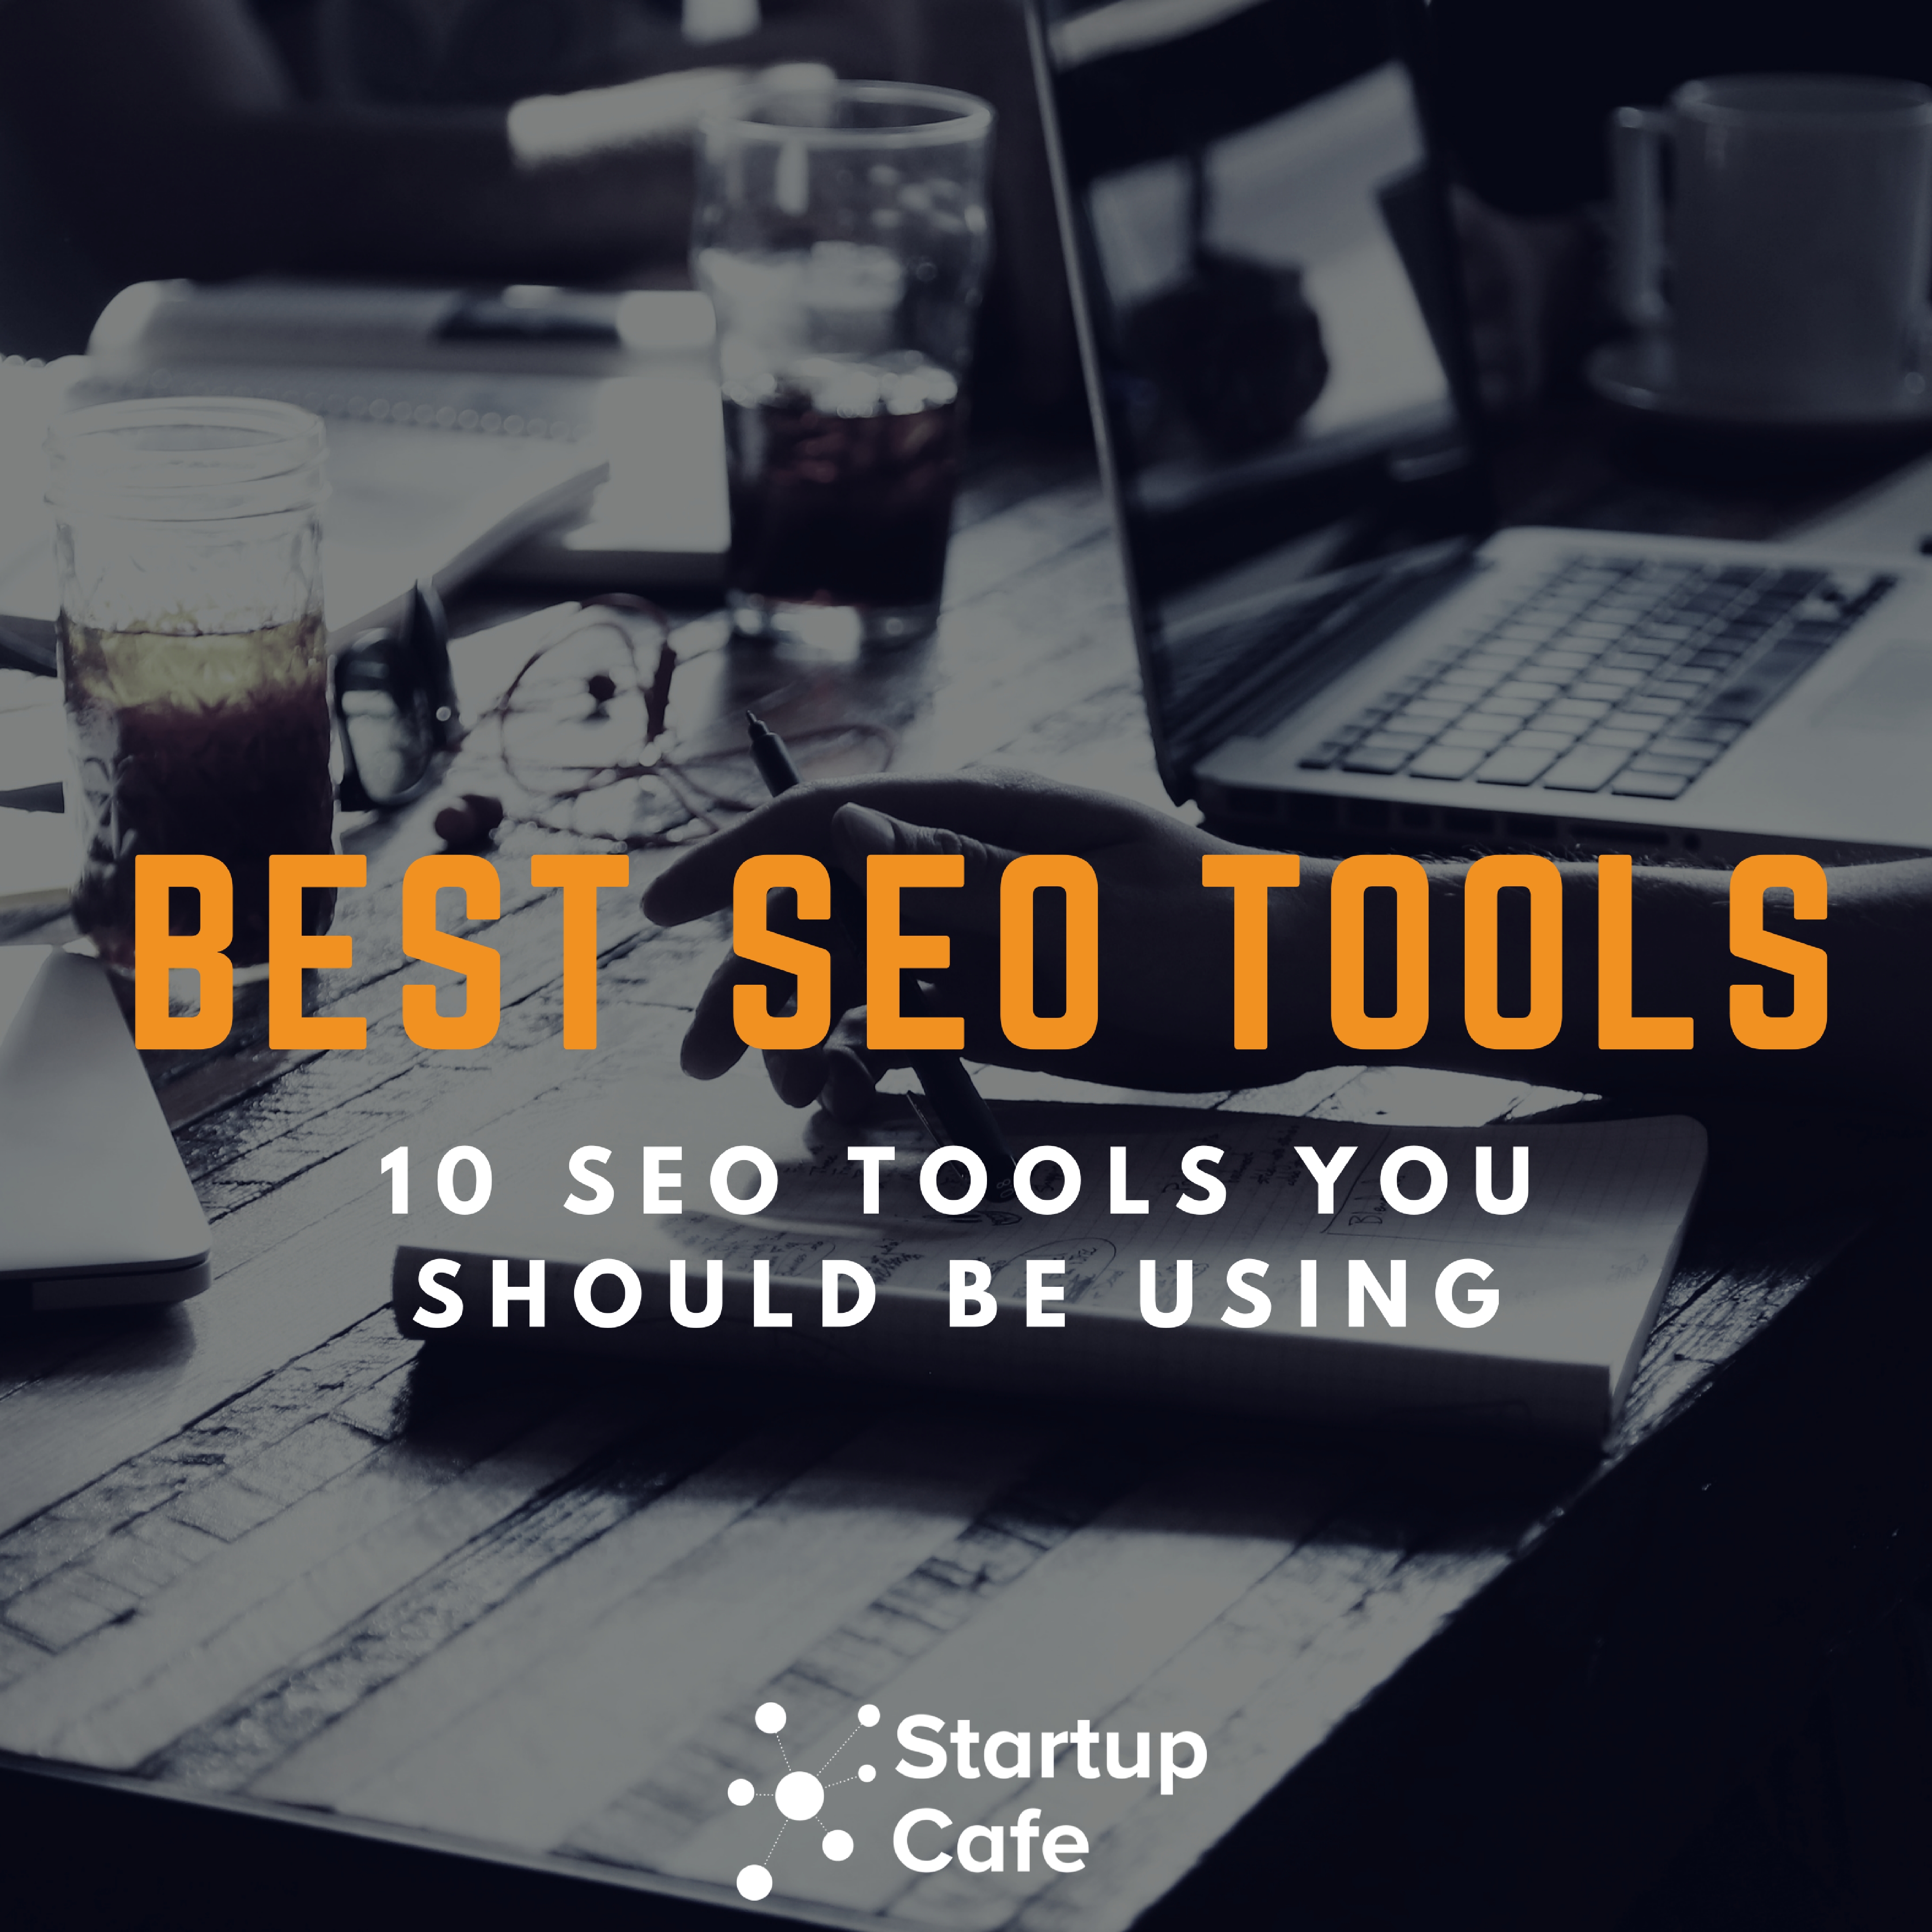 Best SEO Tools: 10 SEO Tools to Supercharge Your Marketing